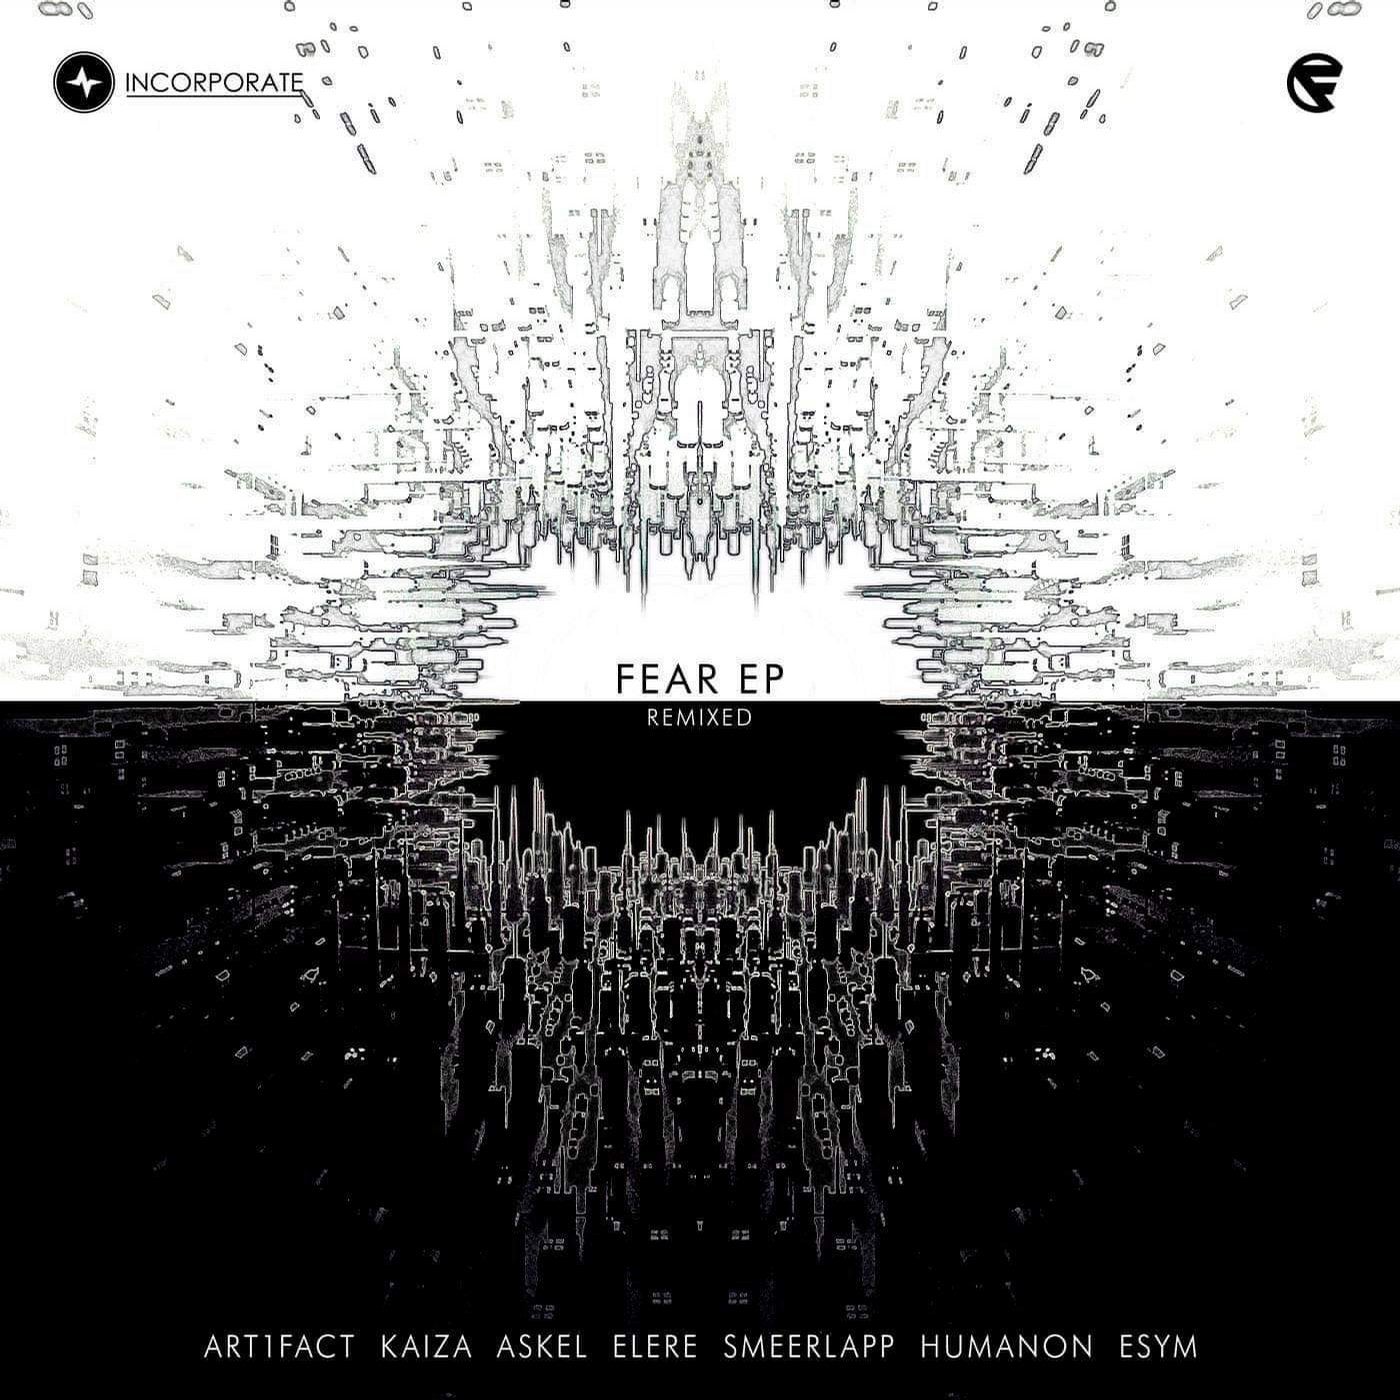 Fear EP Remixed